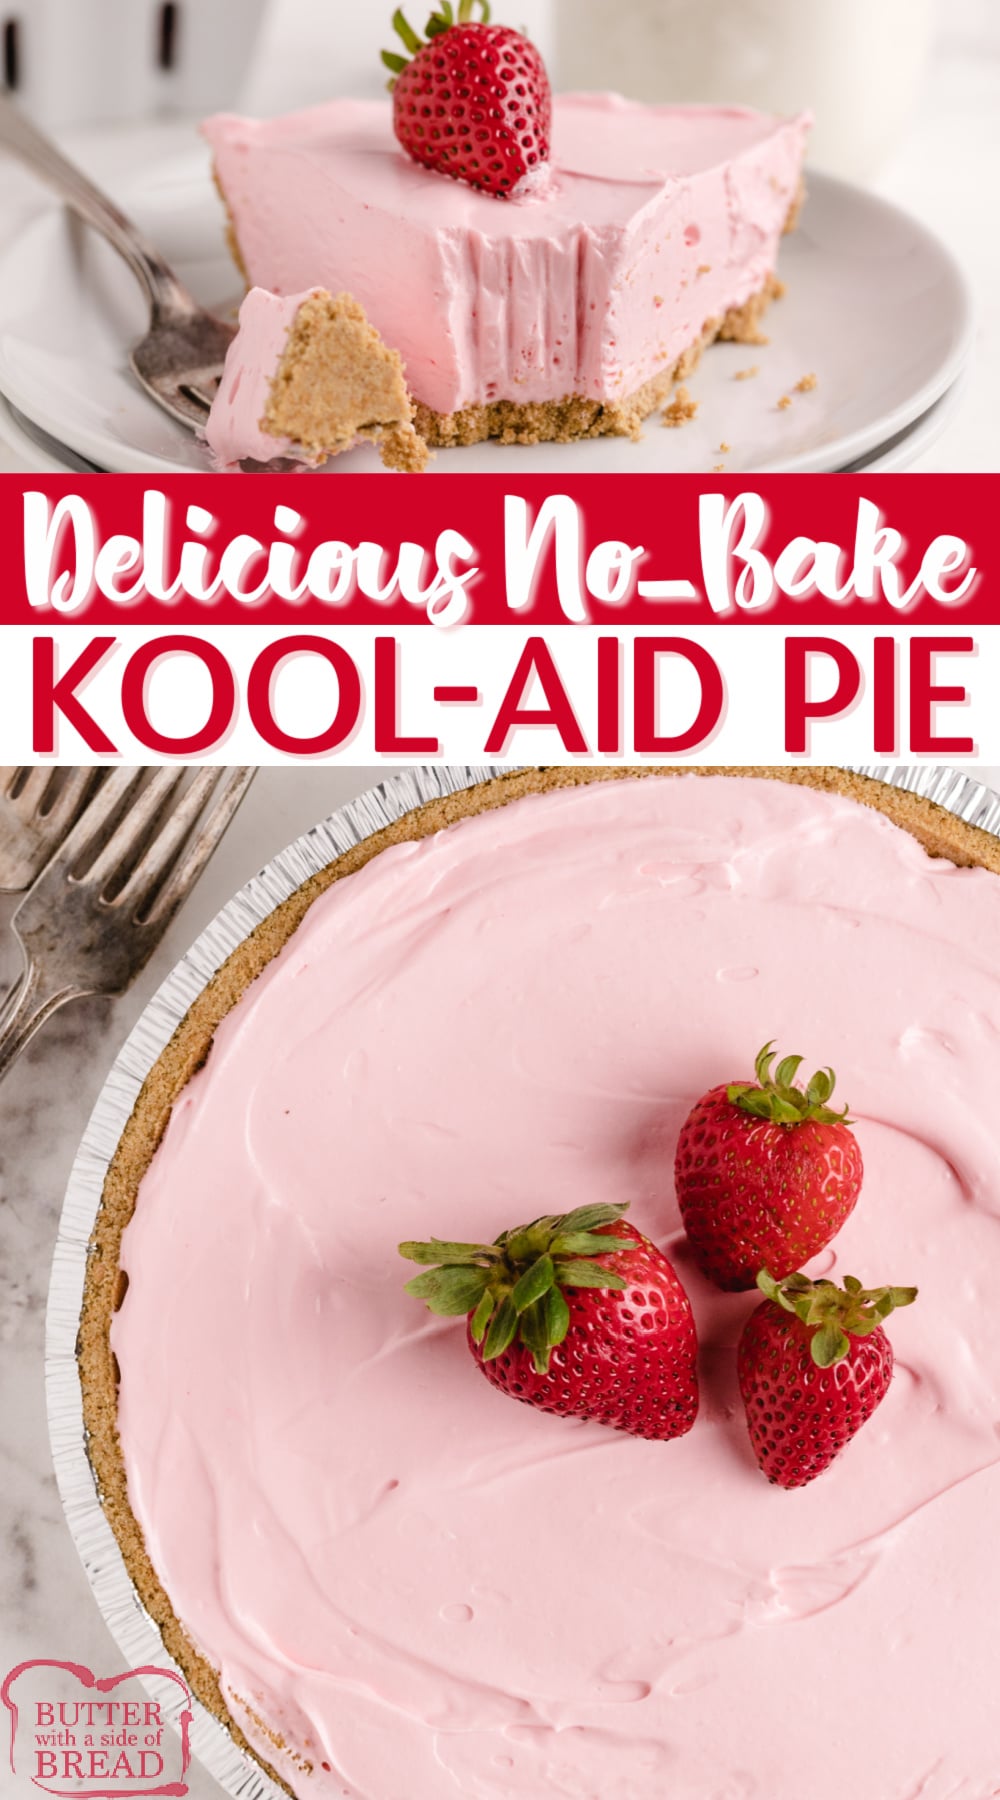 No Bake Kool Aid Pie made with only 4 ingredients and can be made in any flavor you want! Refreshing no bake dessert recipe that is sweet and delicious and so easy to make! 